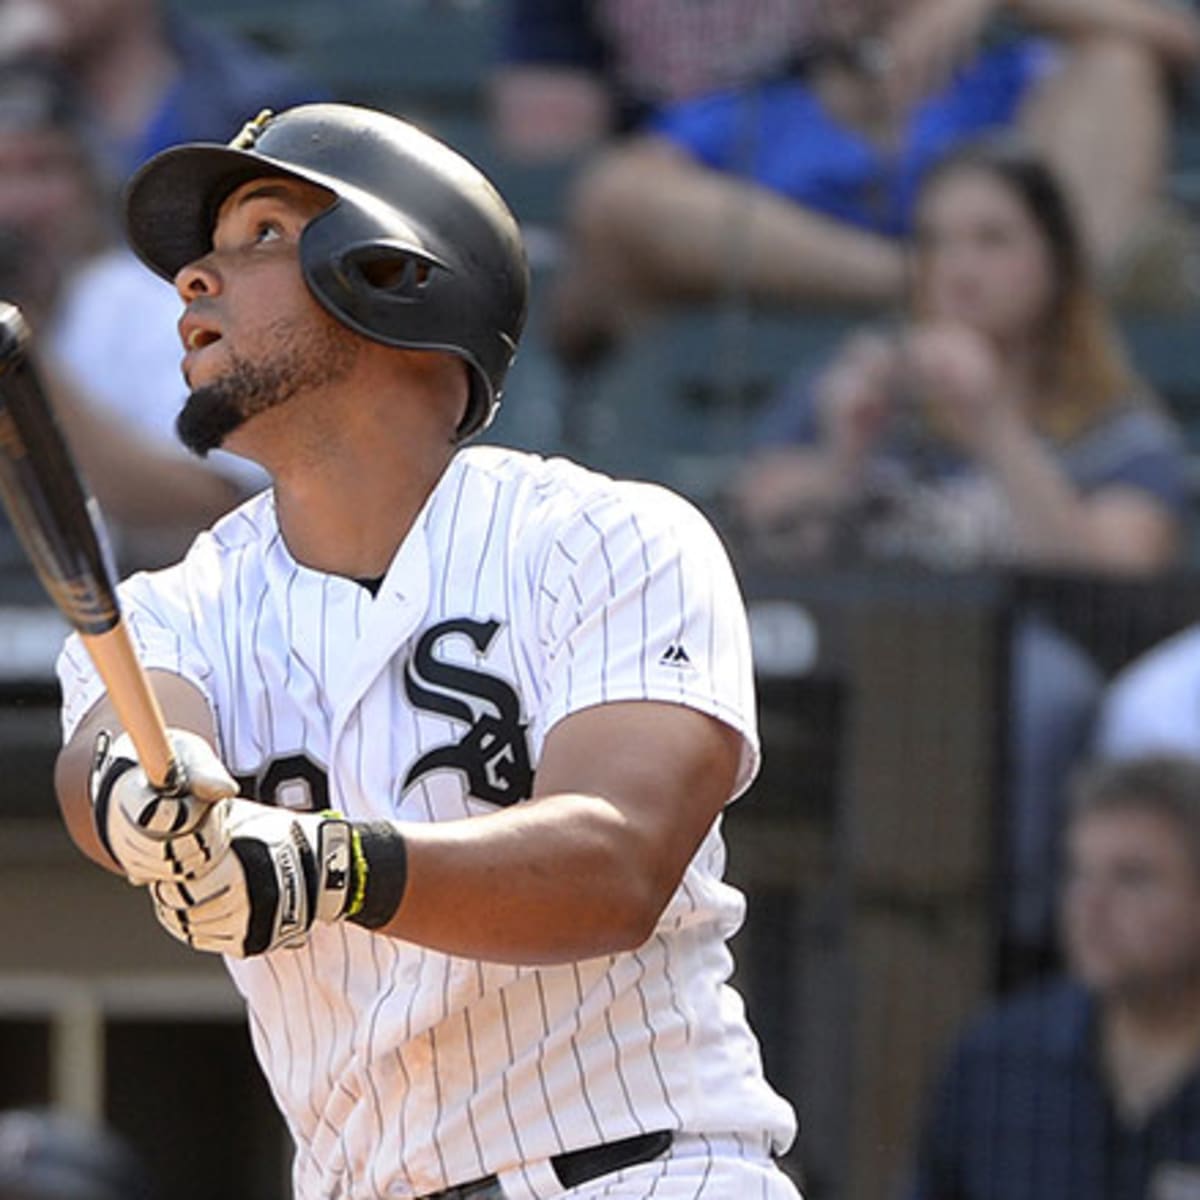 Meet the 2019 Chicago White Sox